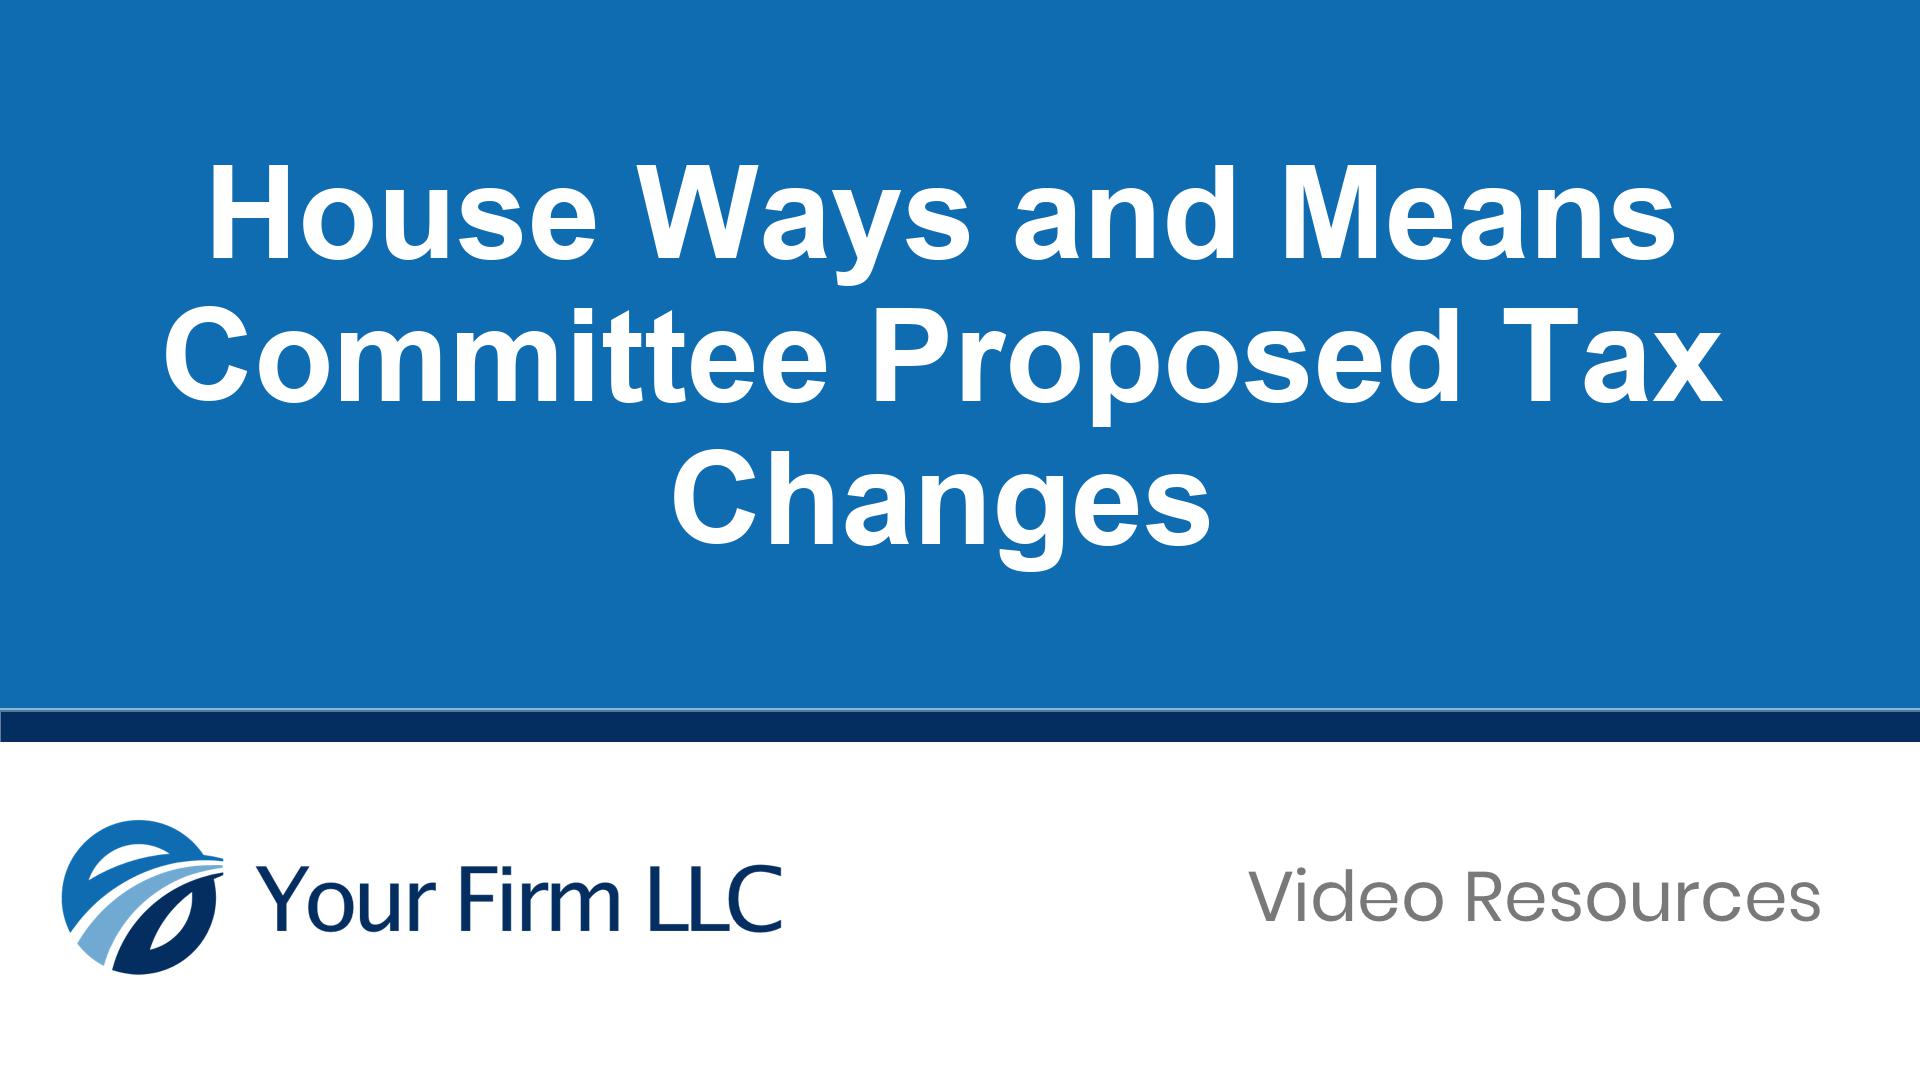 House Ways and Means Committee Proposed Tax Changes